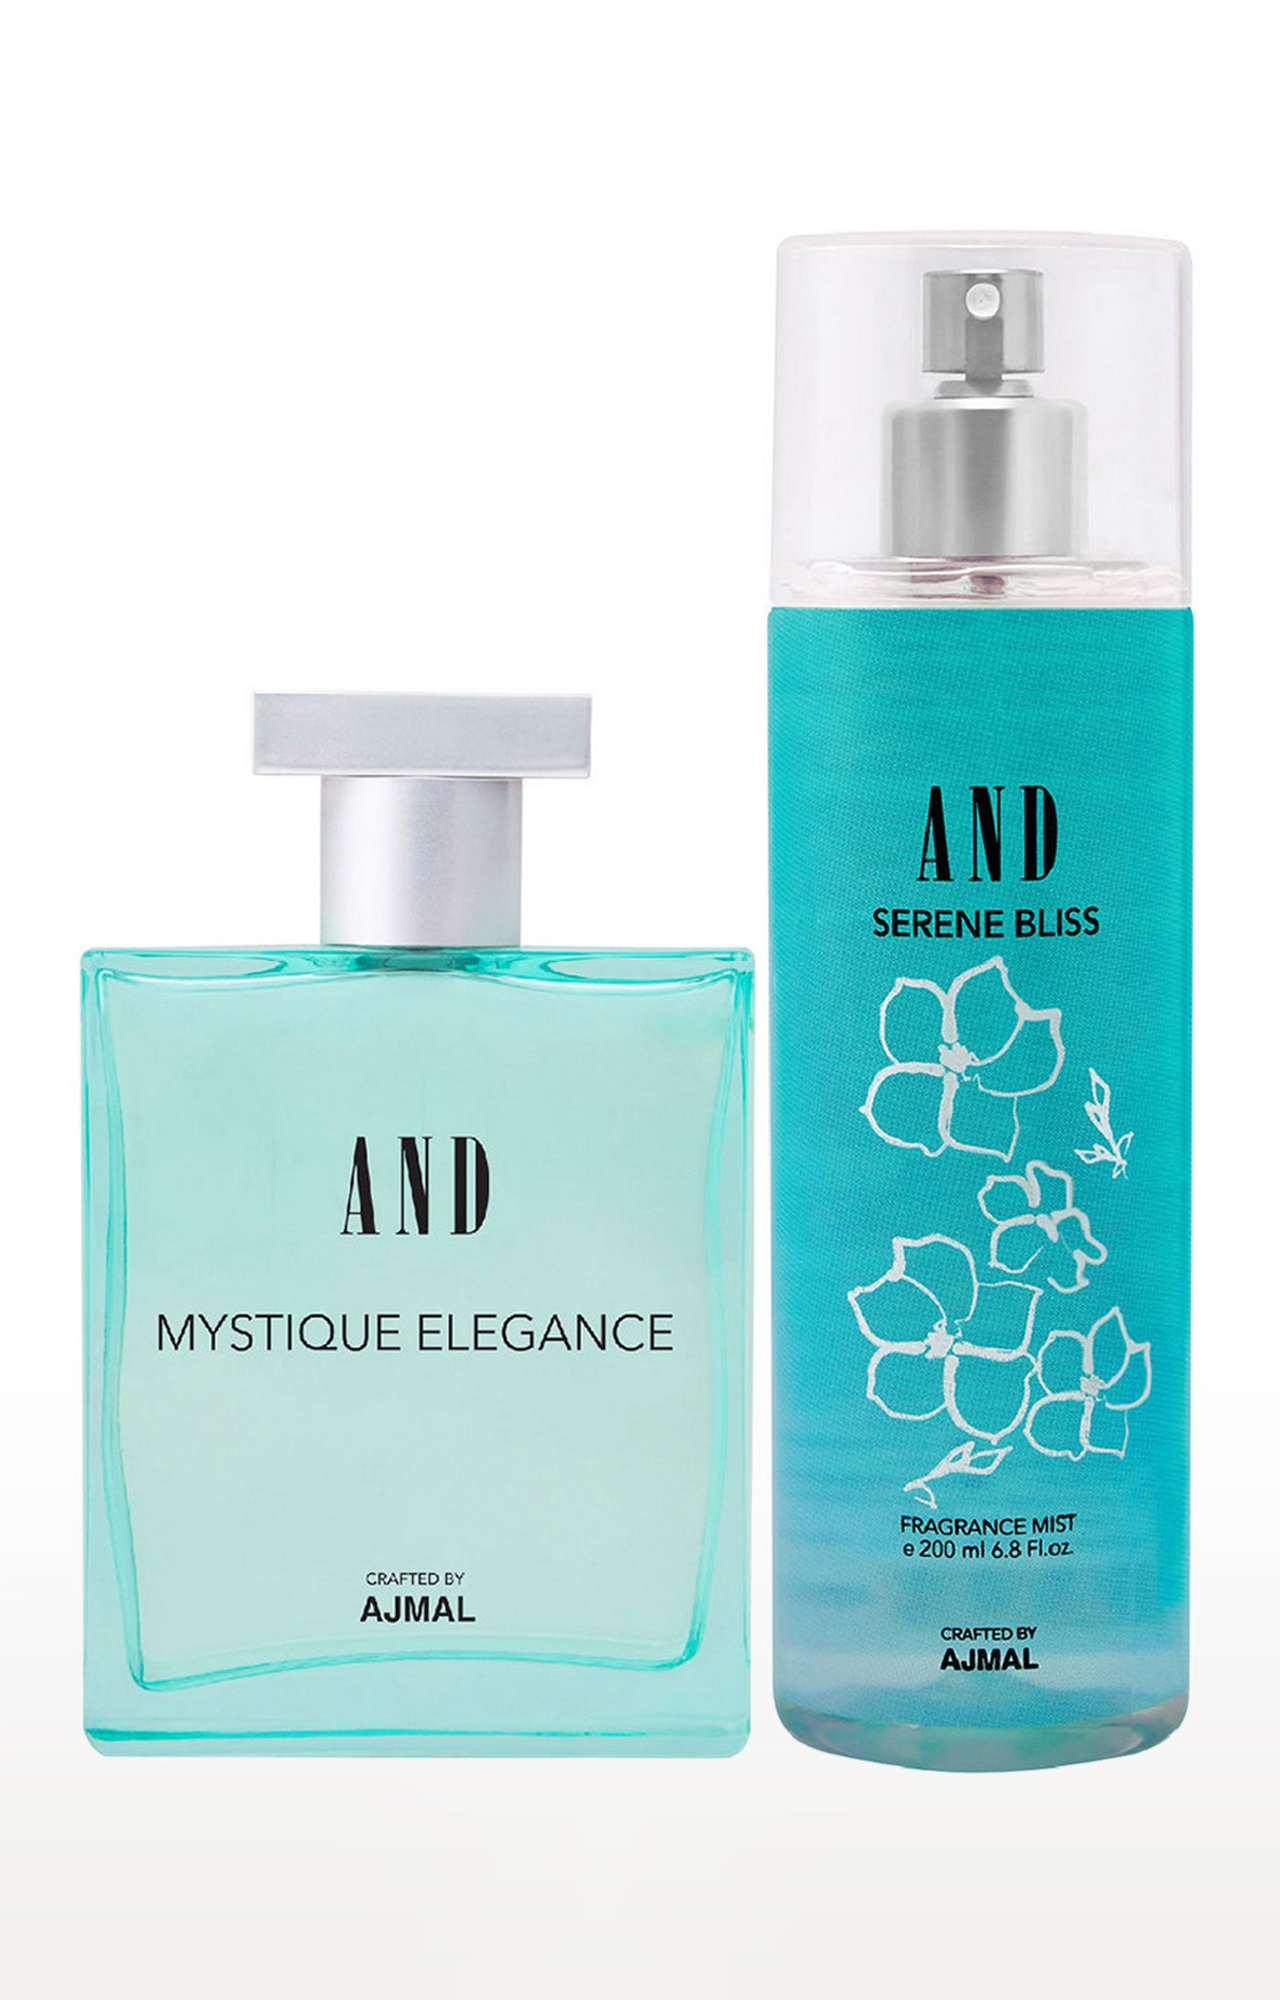 AND Mystique Elegance Eau De Parfum 100ML & Serene Bliss Body Mist 200ML Pack of 2 for Women Crafted by Ajmal 